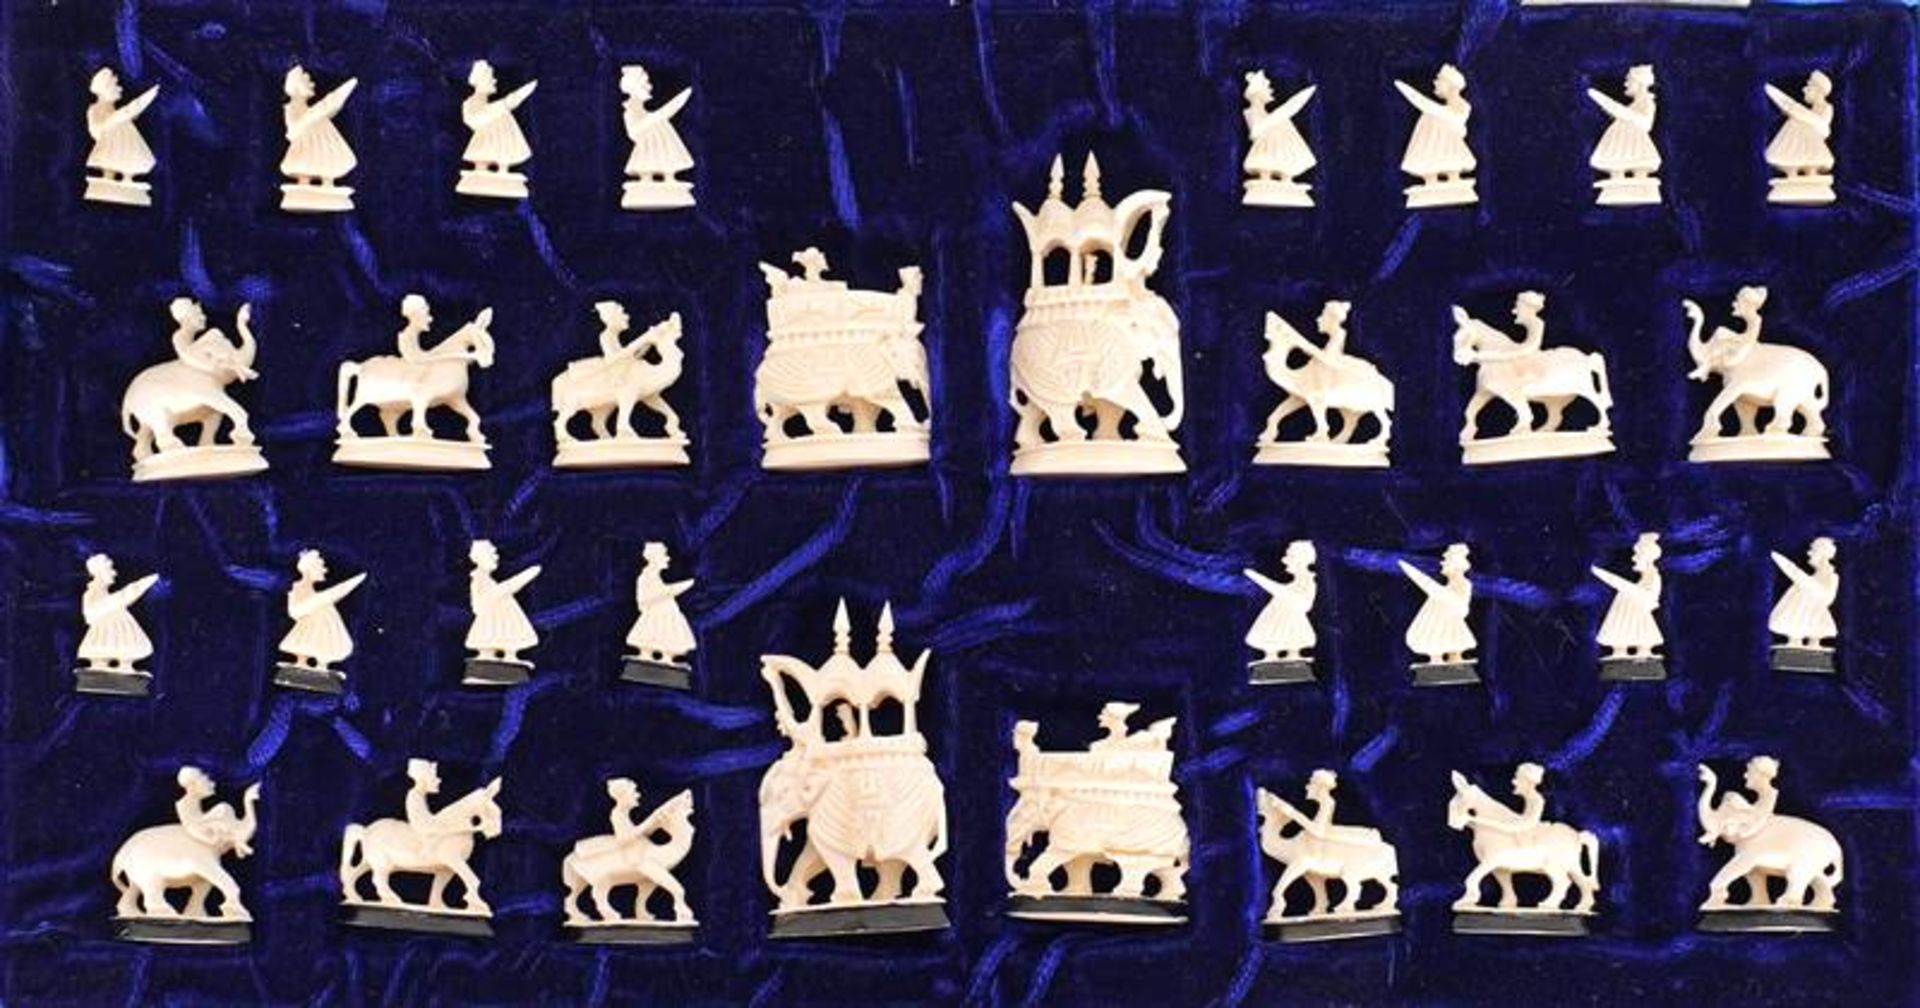 Chess figures - Image 2 of 2